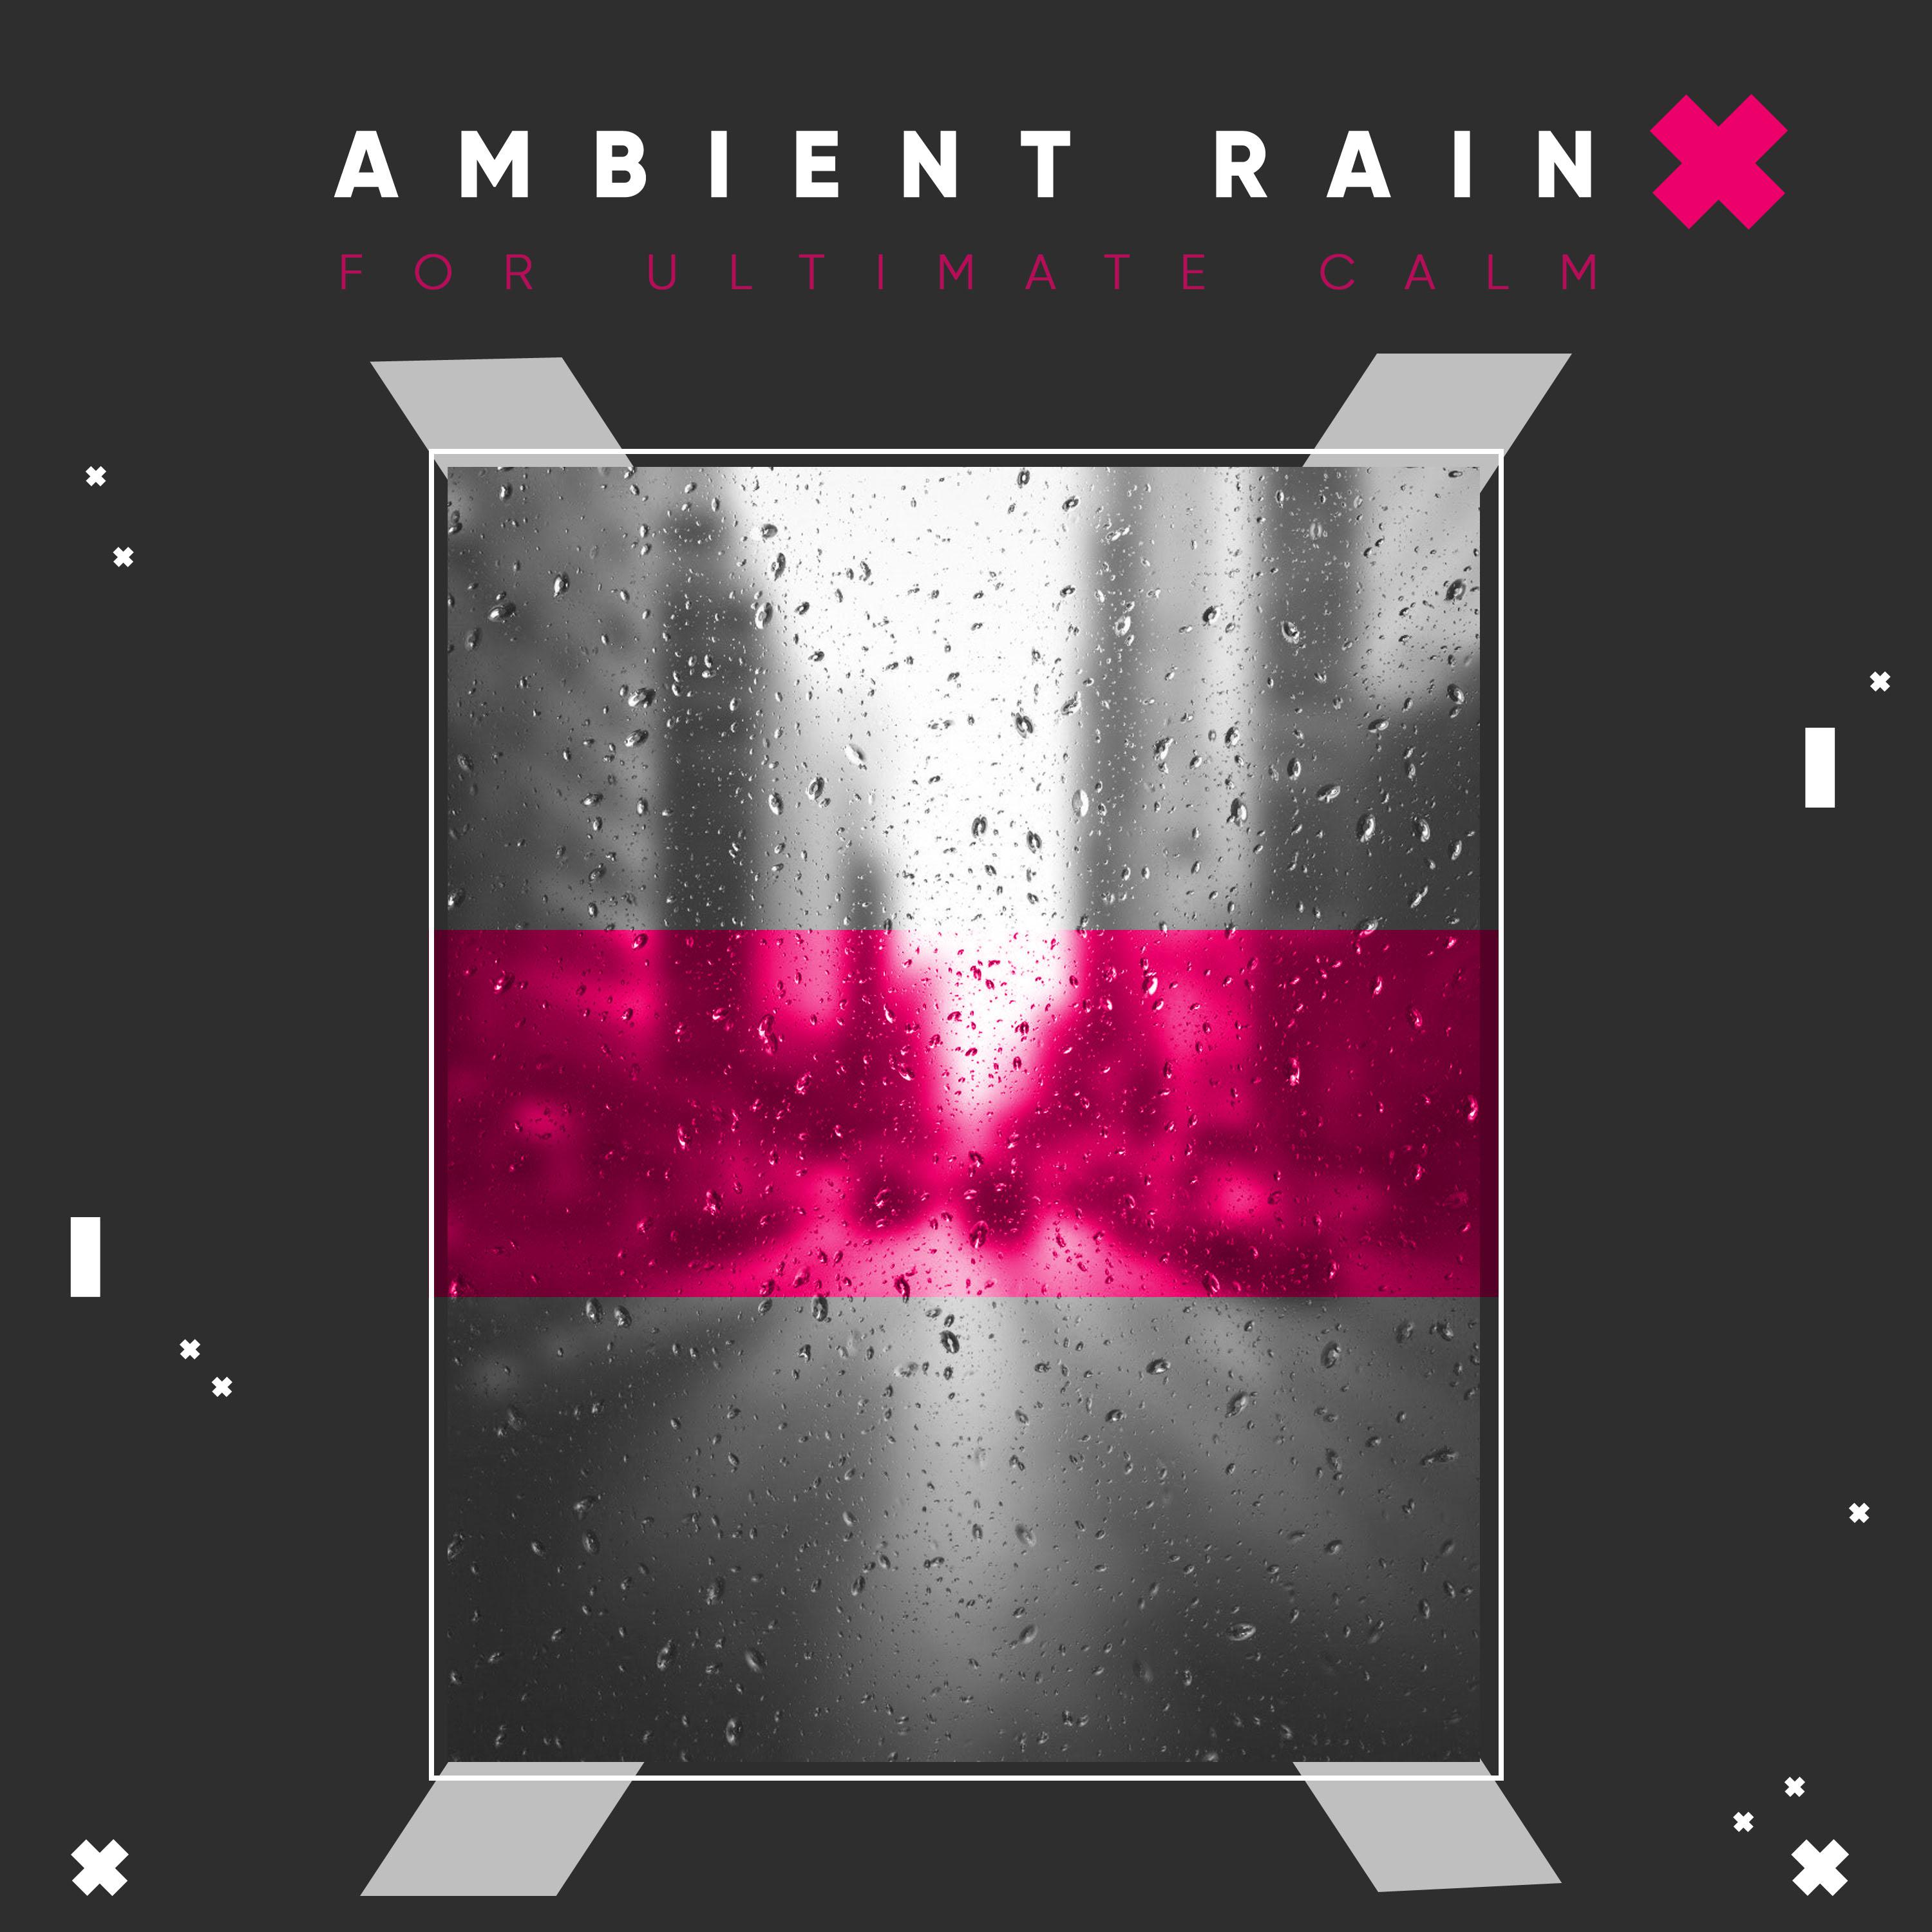 18 Ambient Rain Sounds for Ultimate Calm